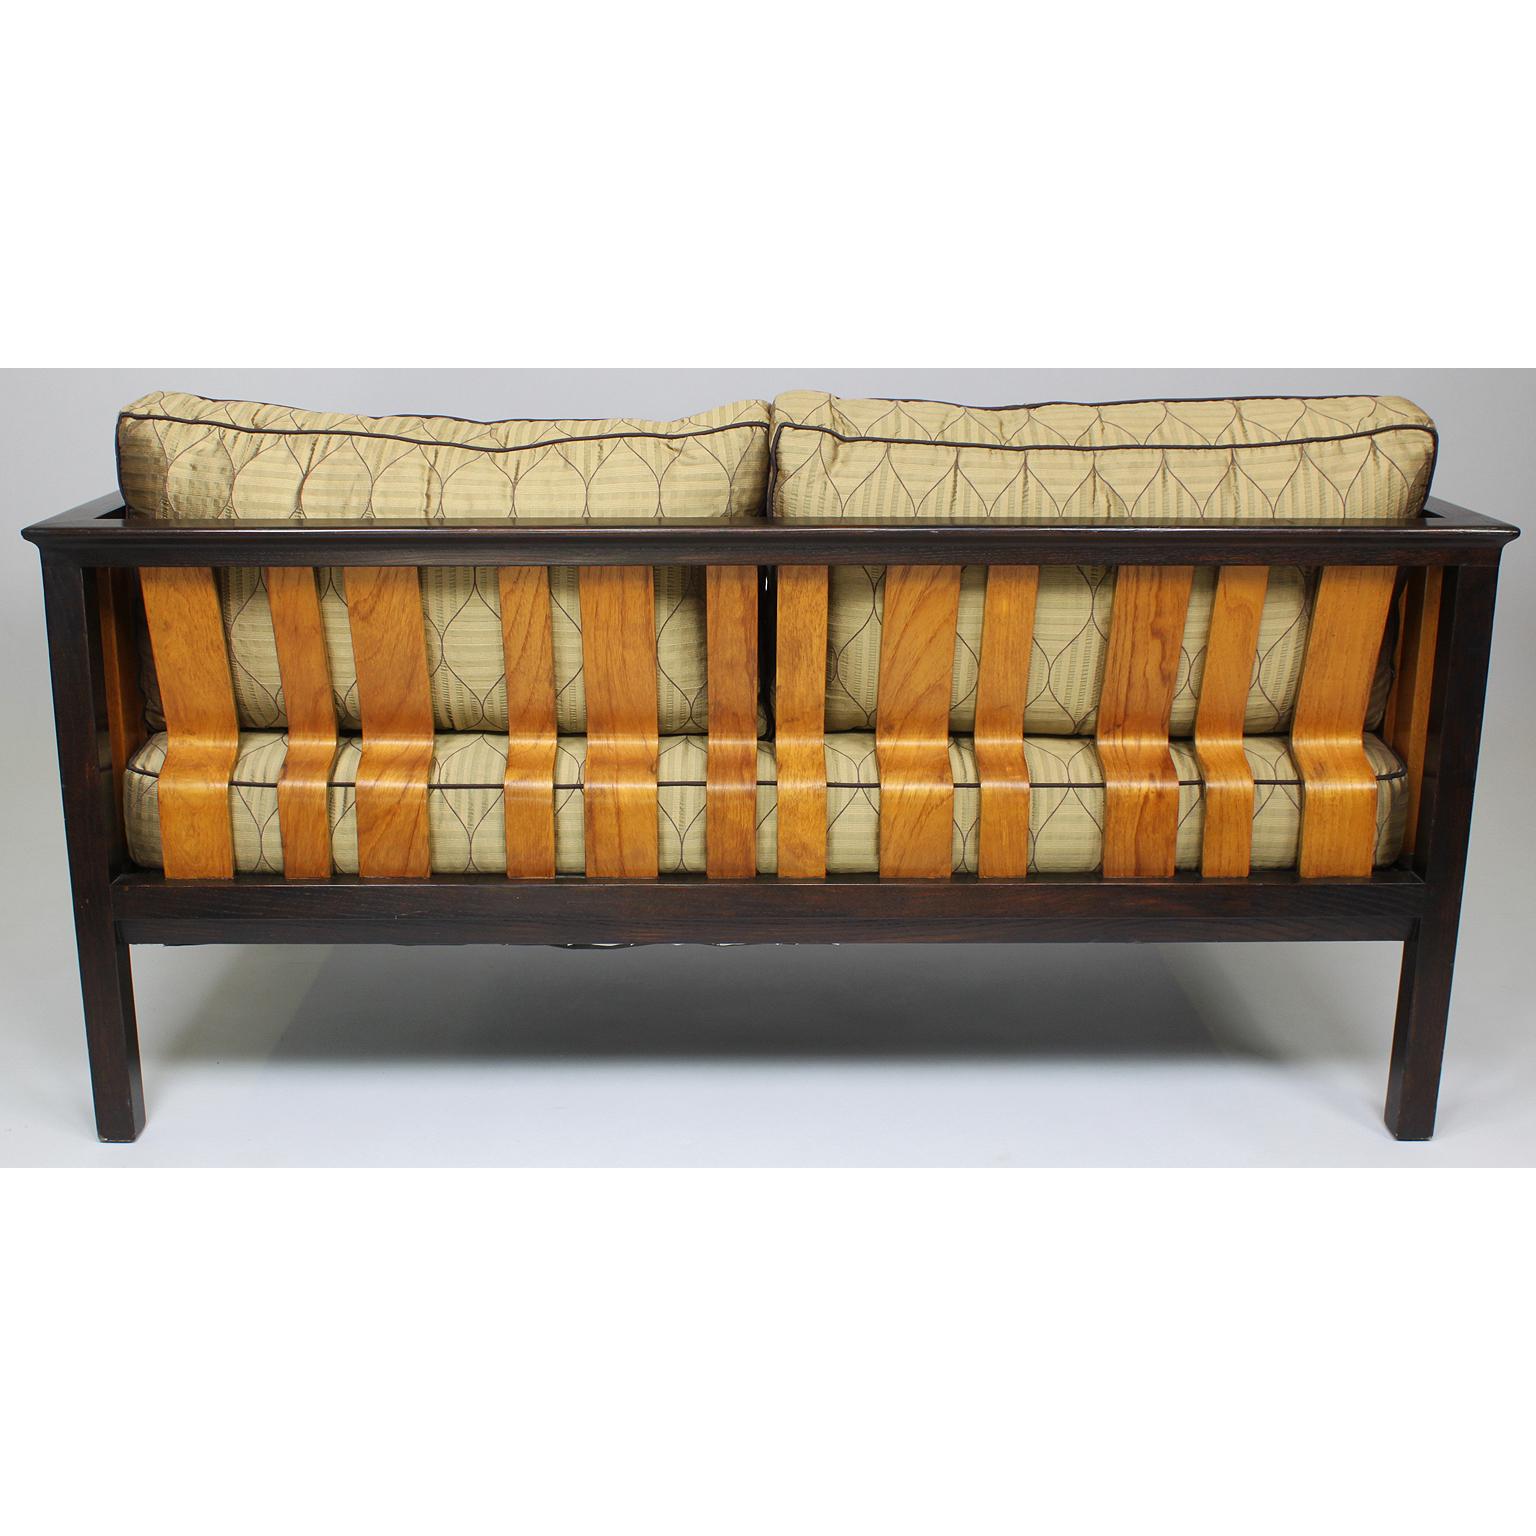 Rare Mahogany and Ash Loveseat, Settee Designed by Edward Wormley for Dunbar For Sale 1